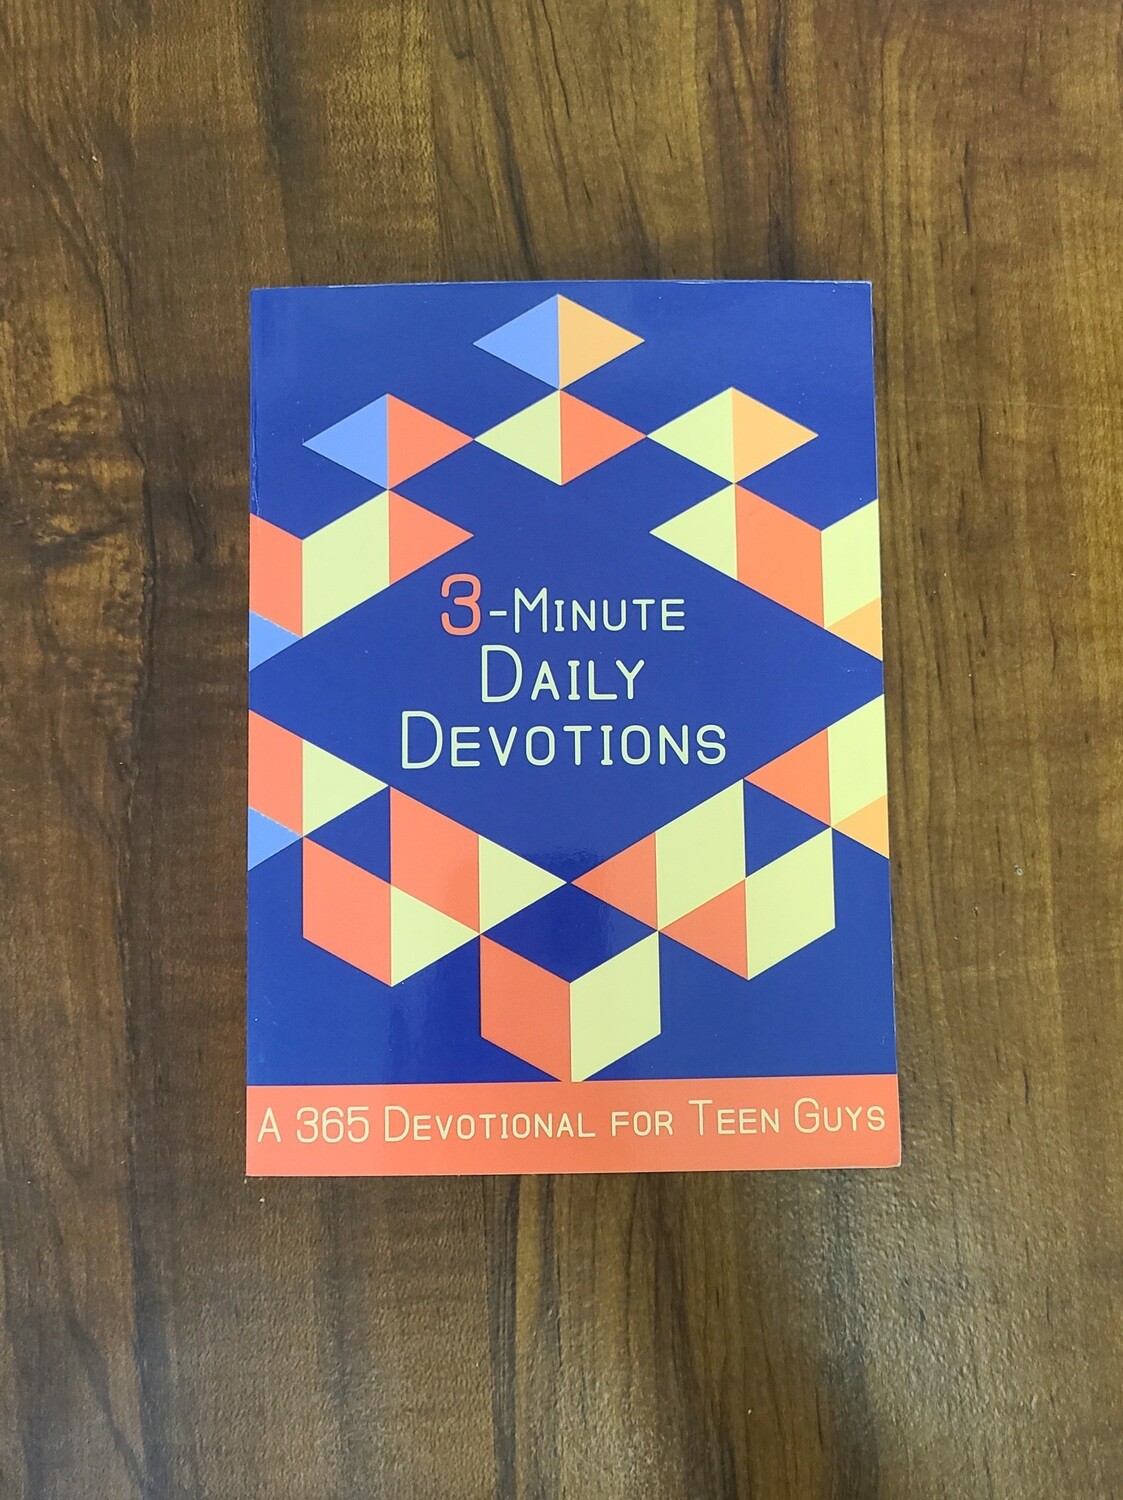 3-Minute 365 Daily Devotions for Teen Guys by Jesse Campbell